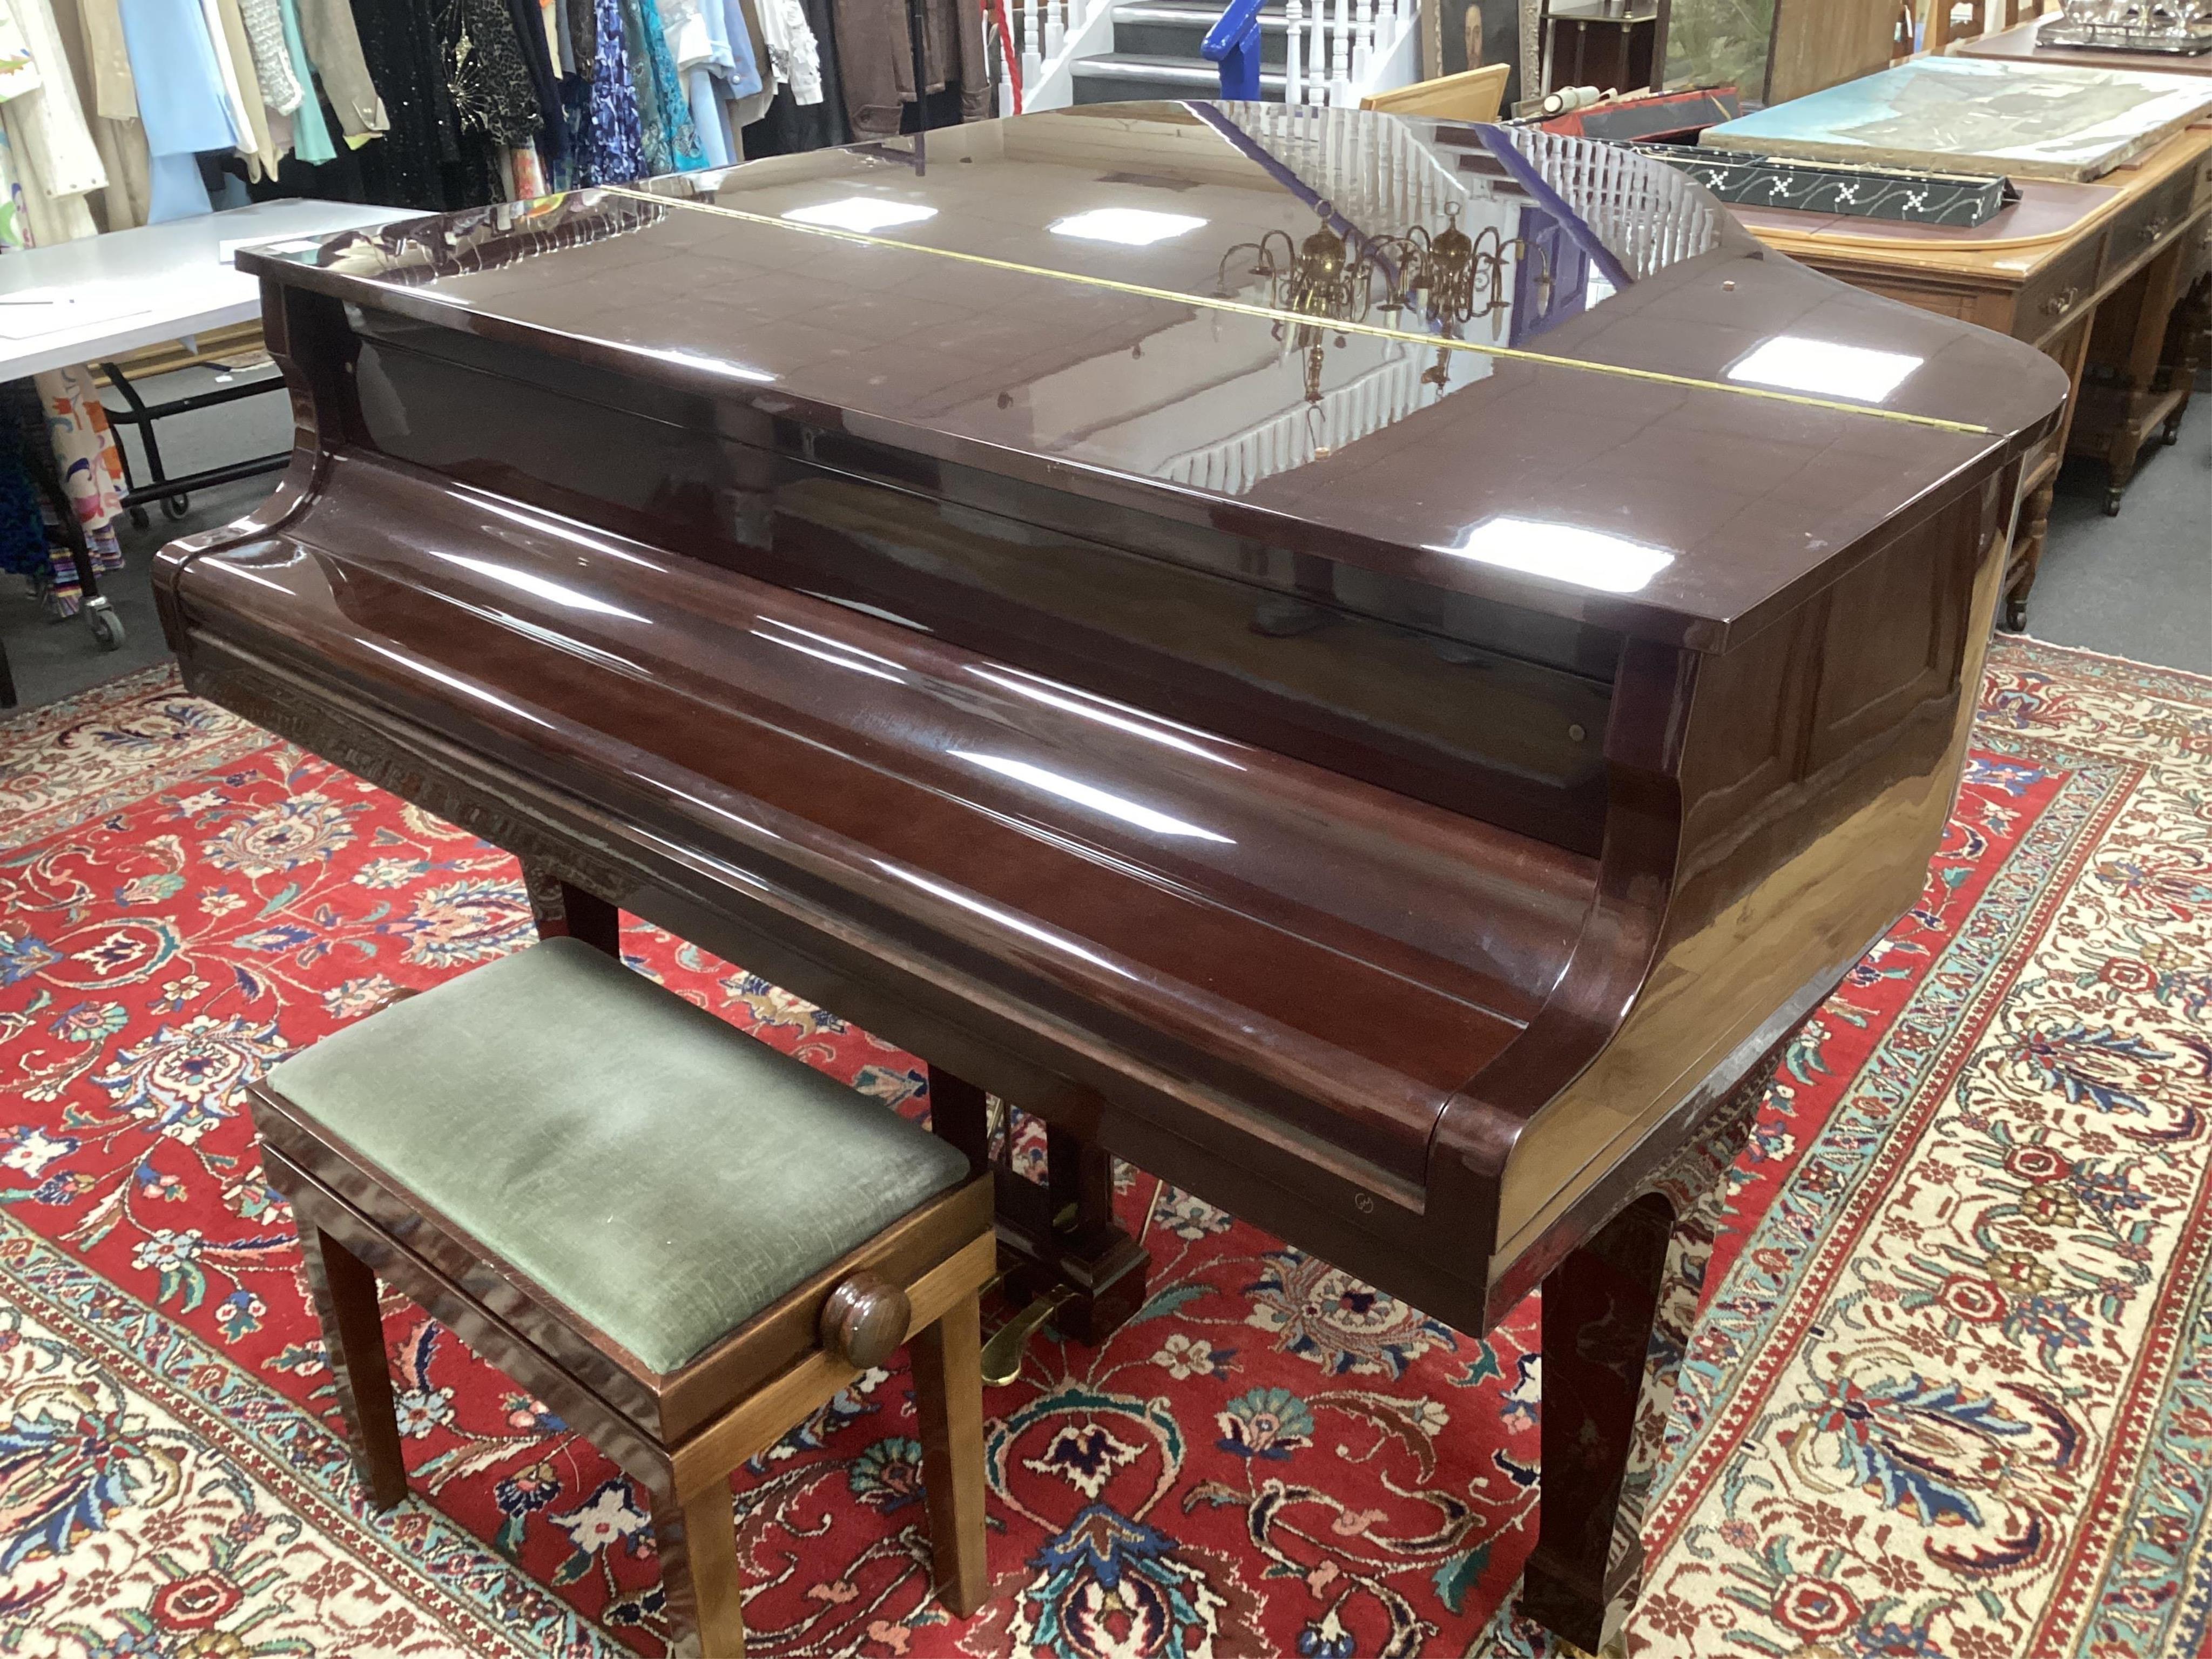 A Kawai KG-ID 5ft grand piano (c.1986), serial number 1675219, mahogany cased on square tapered legs, width 149cm, height 101cm, with adjustable stool. Condition - piano good